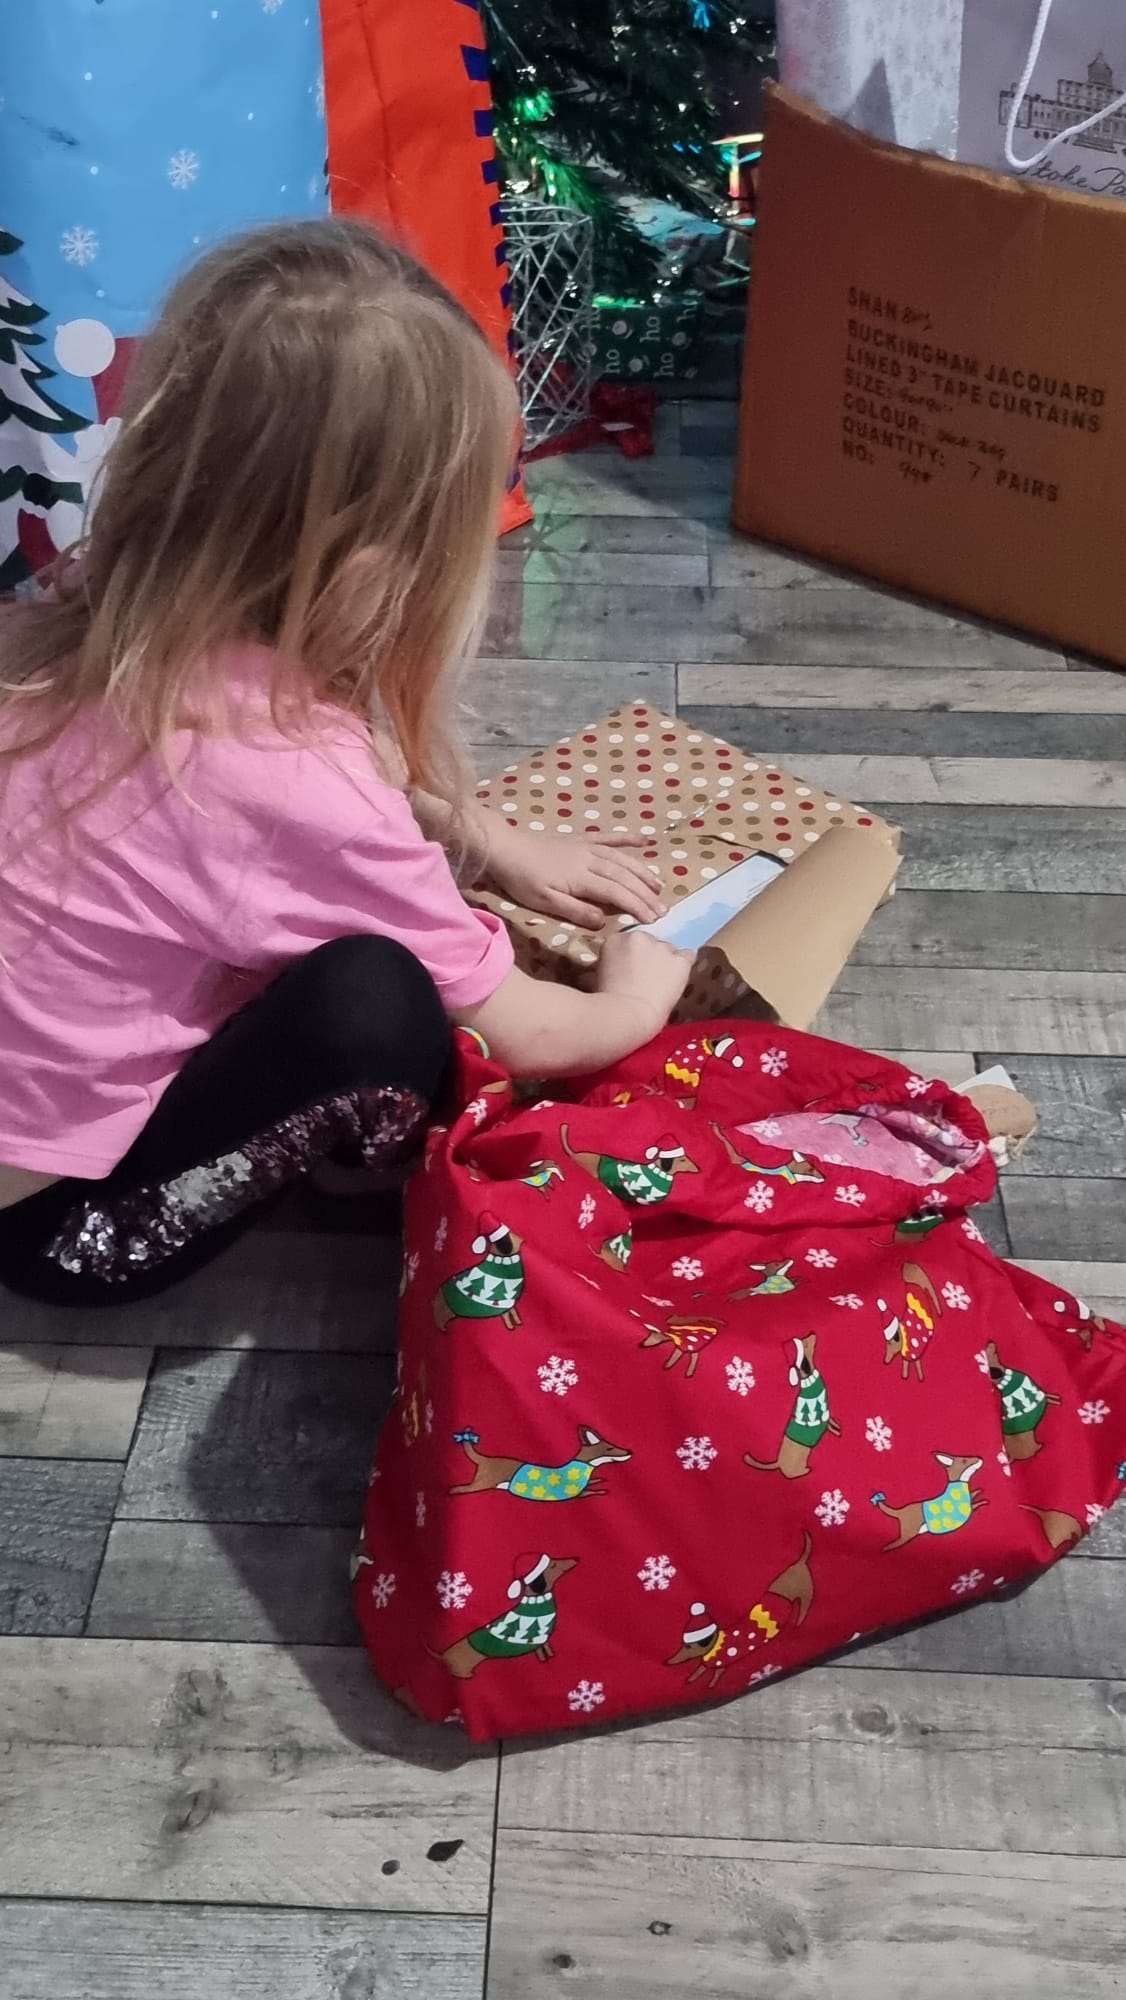 Child opening a wrapped gift